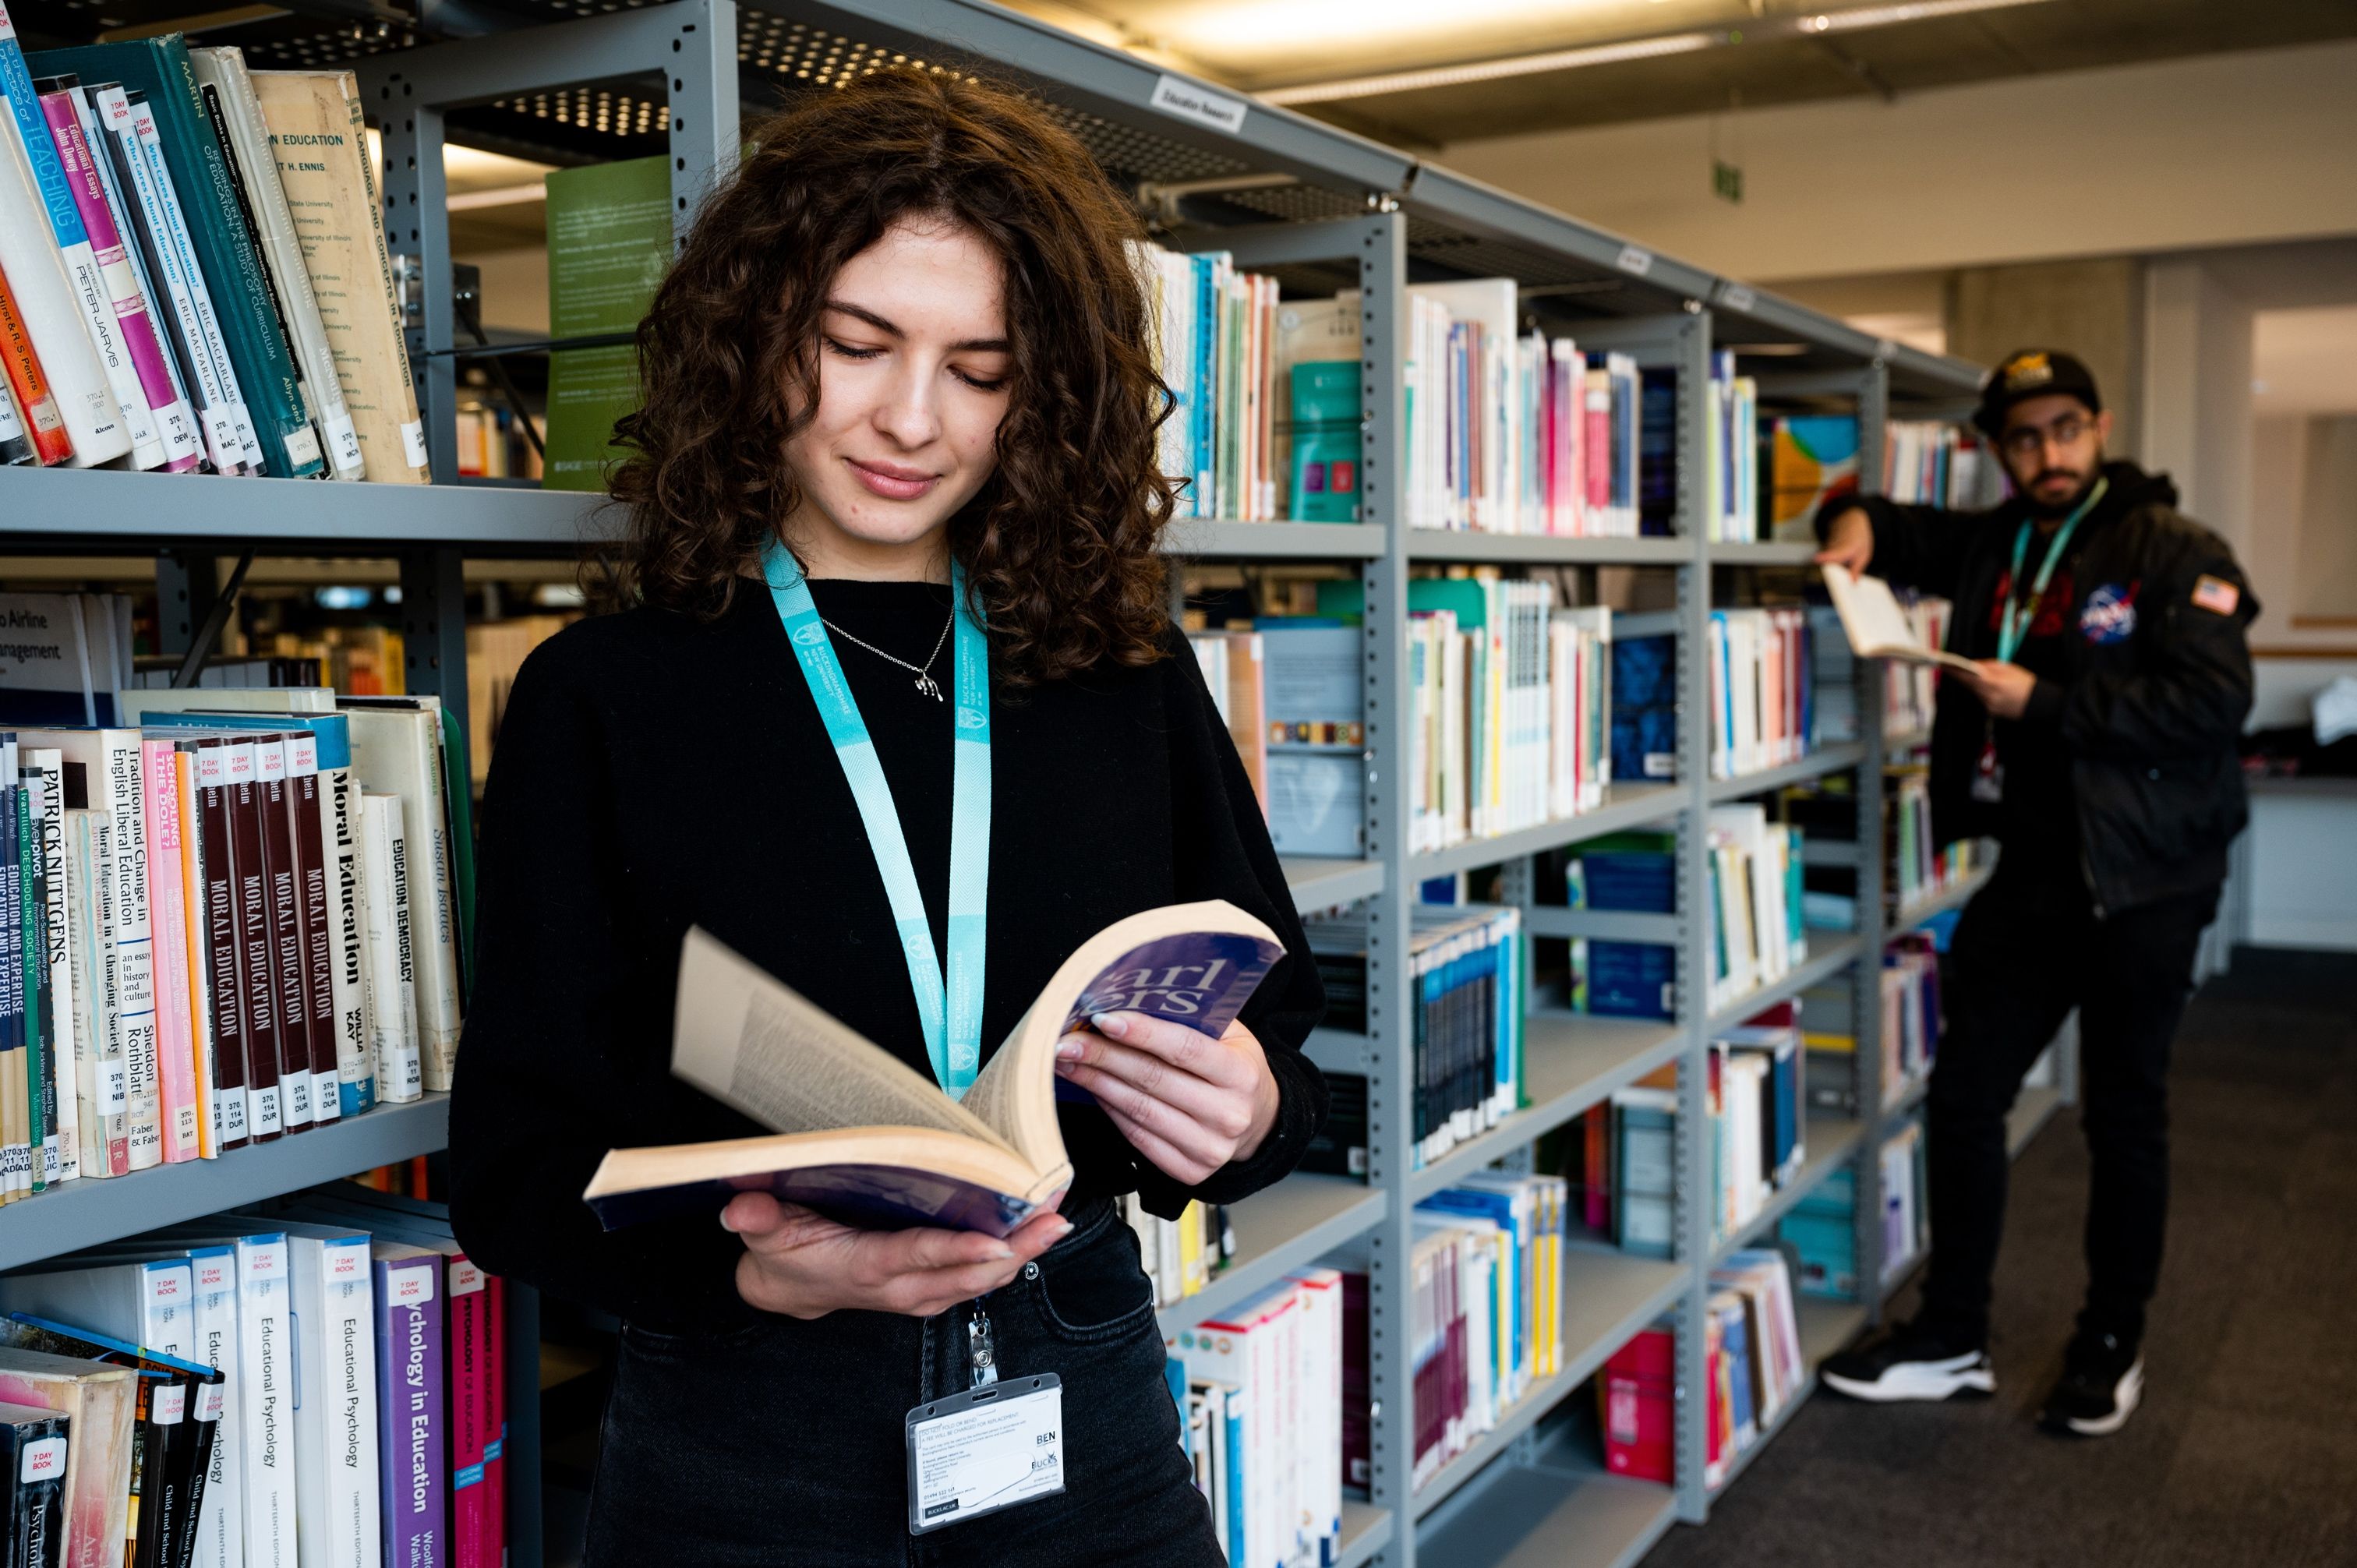 female student in library looking at books